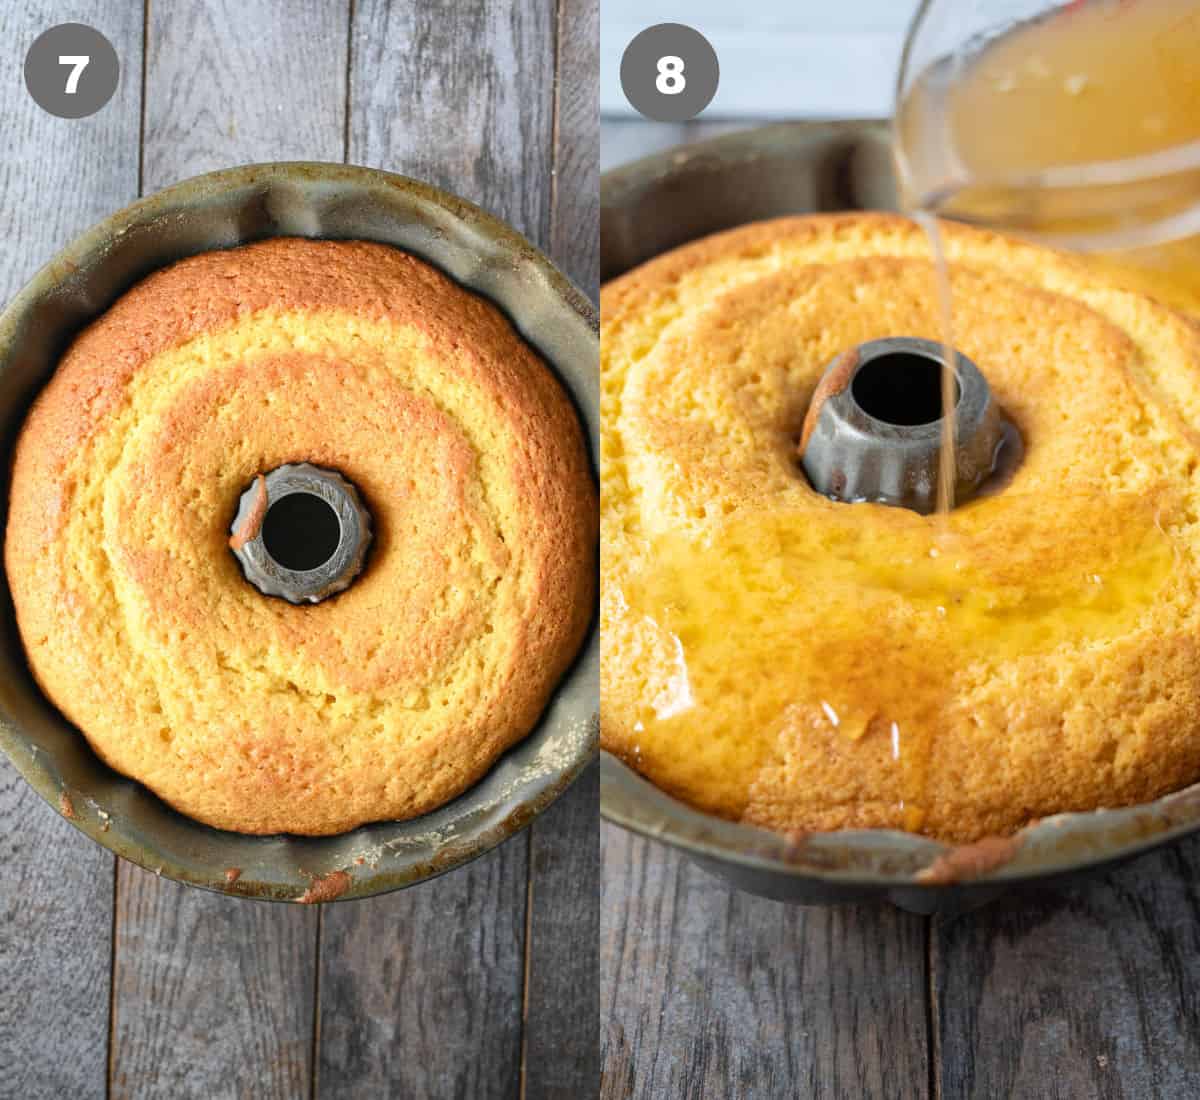 A bundt cake in a bundt pan and rum syrup being poured on top.